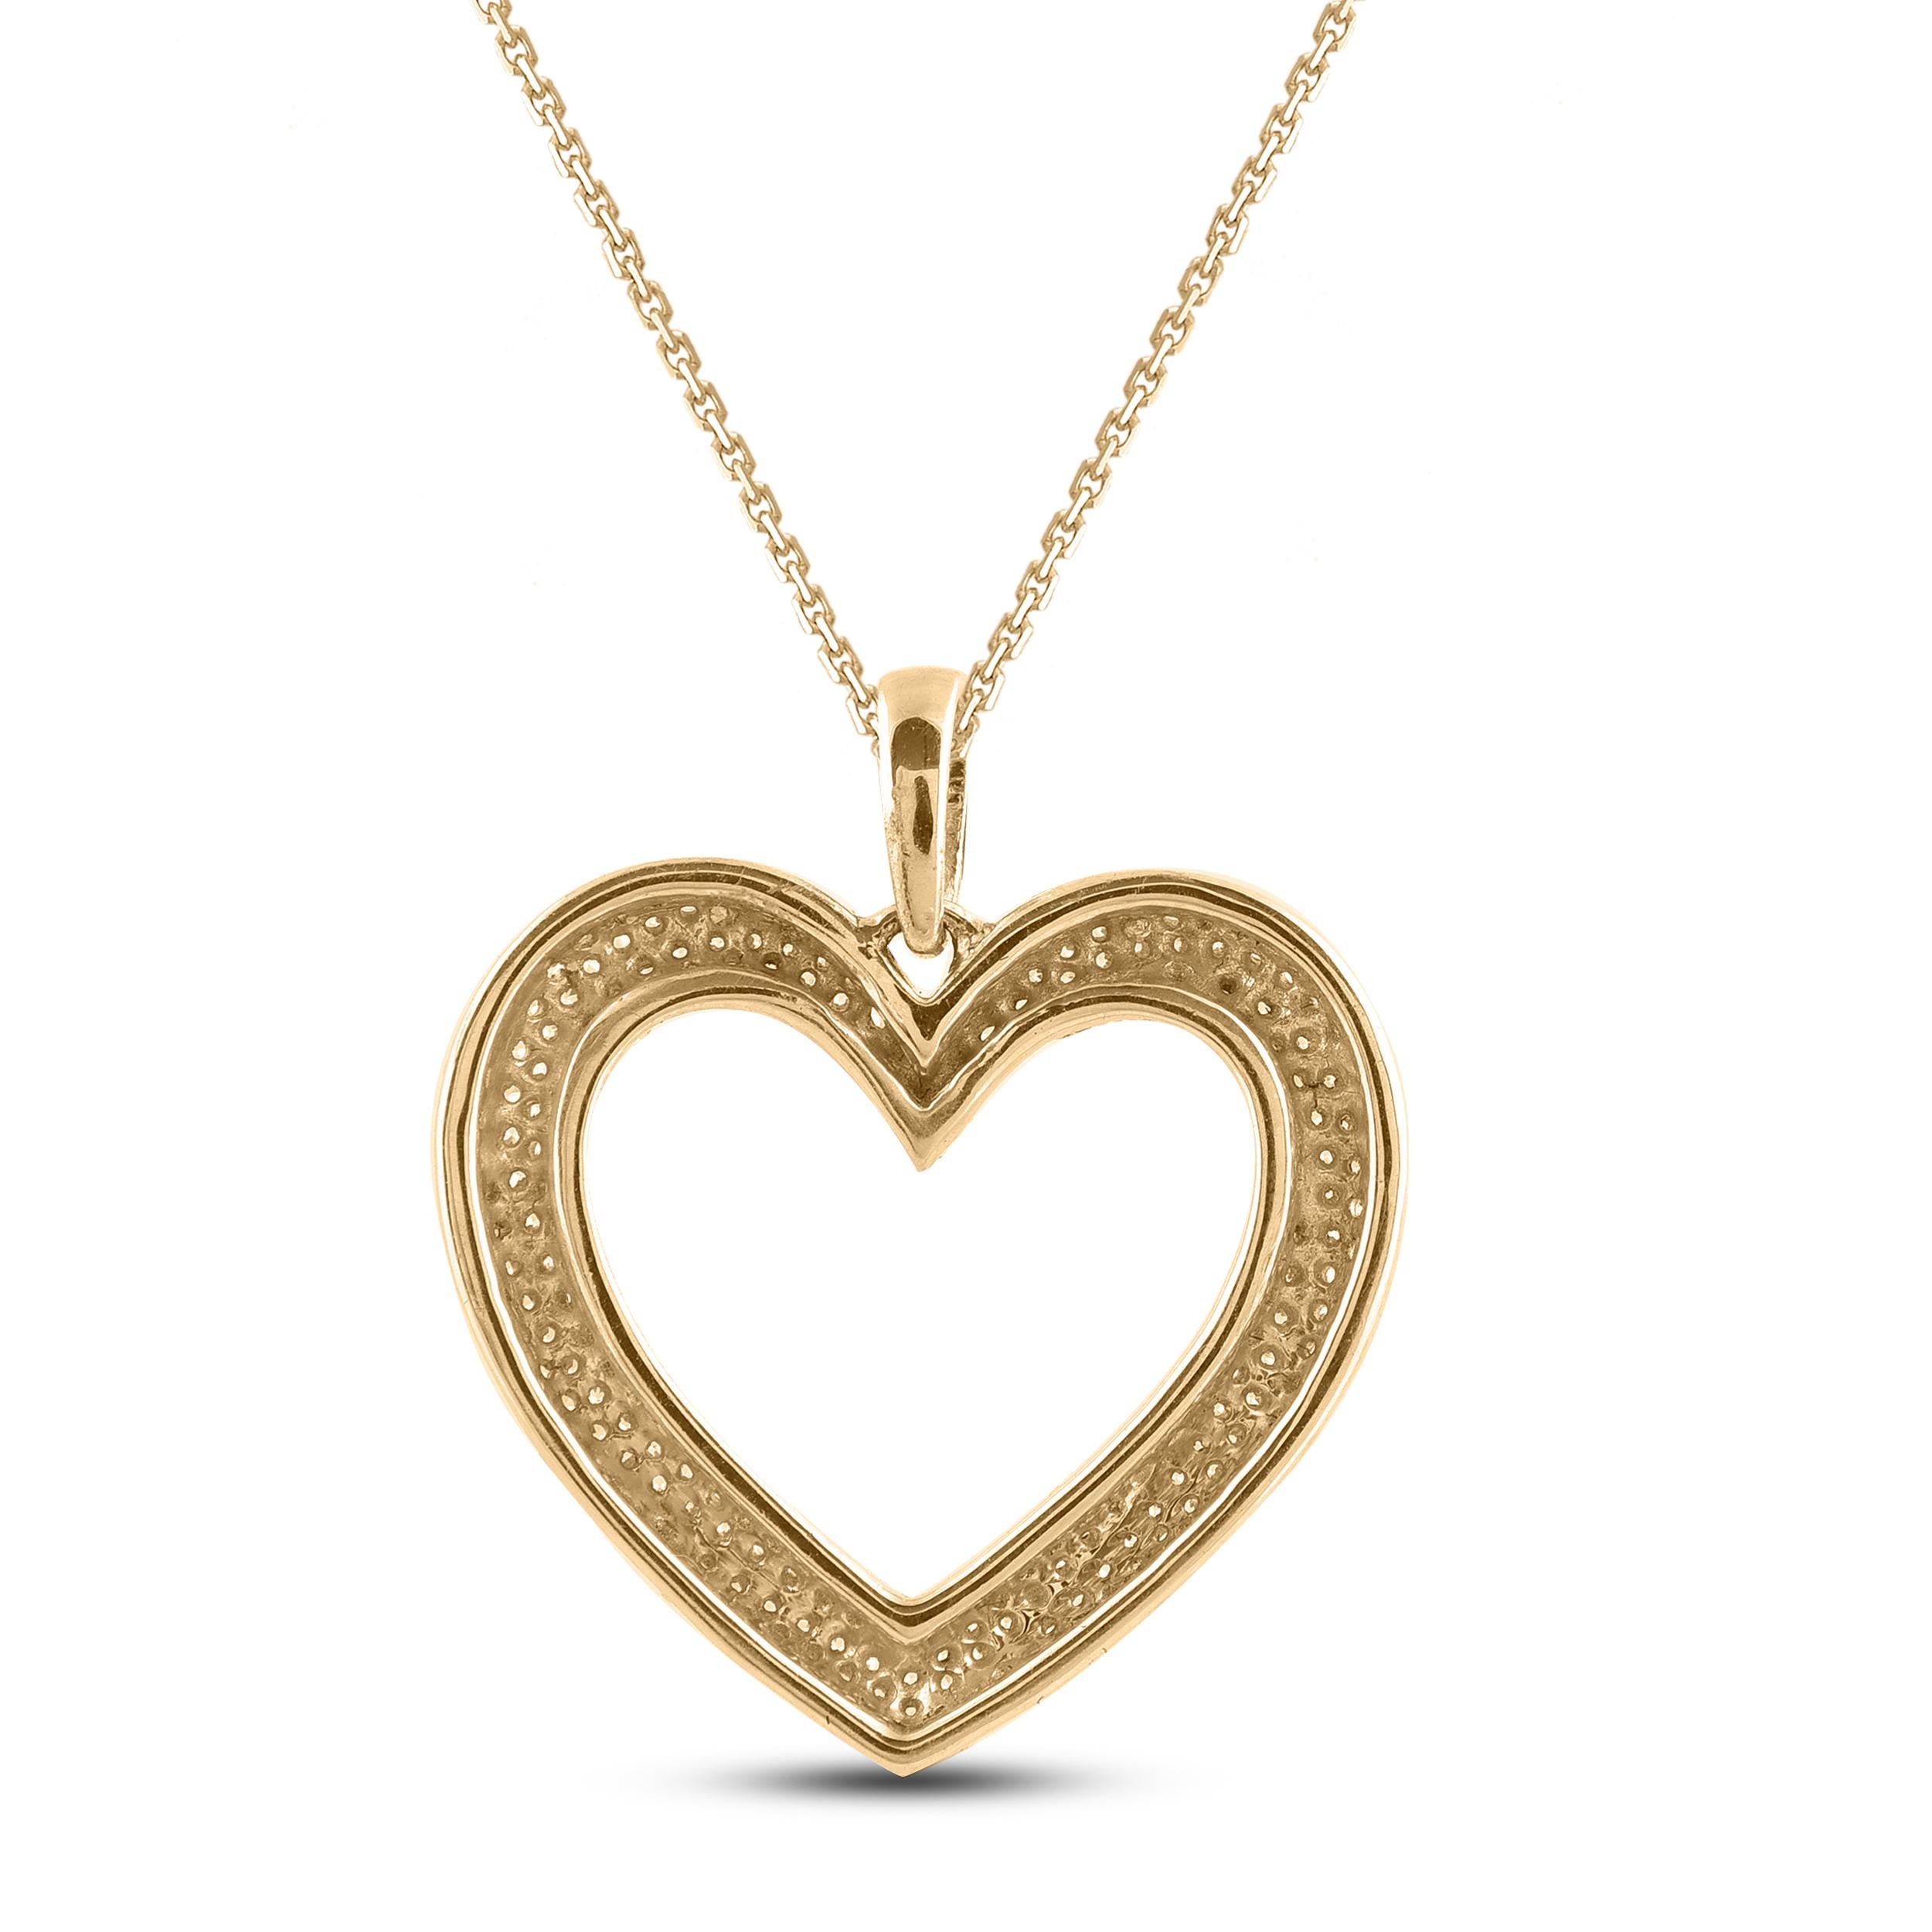 Contemporary TJD 0.50 Carat Natural Round Diamond 14 Karat Yellow Gold Heart Pendant Necklace For Sale